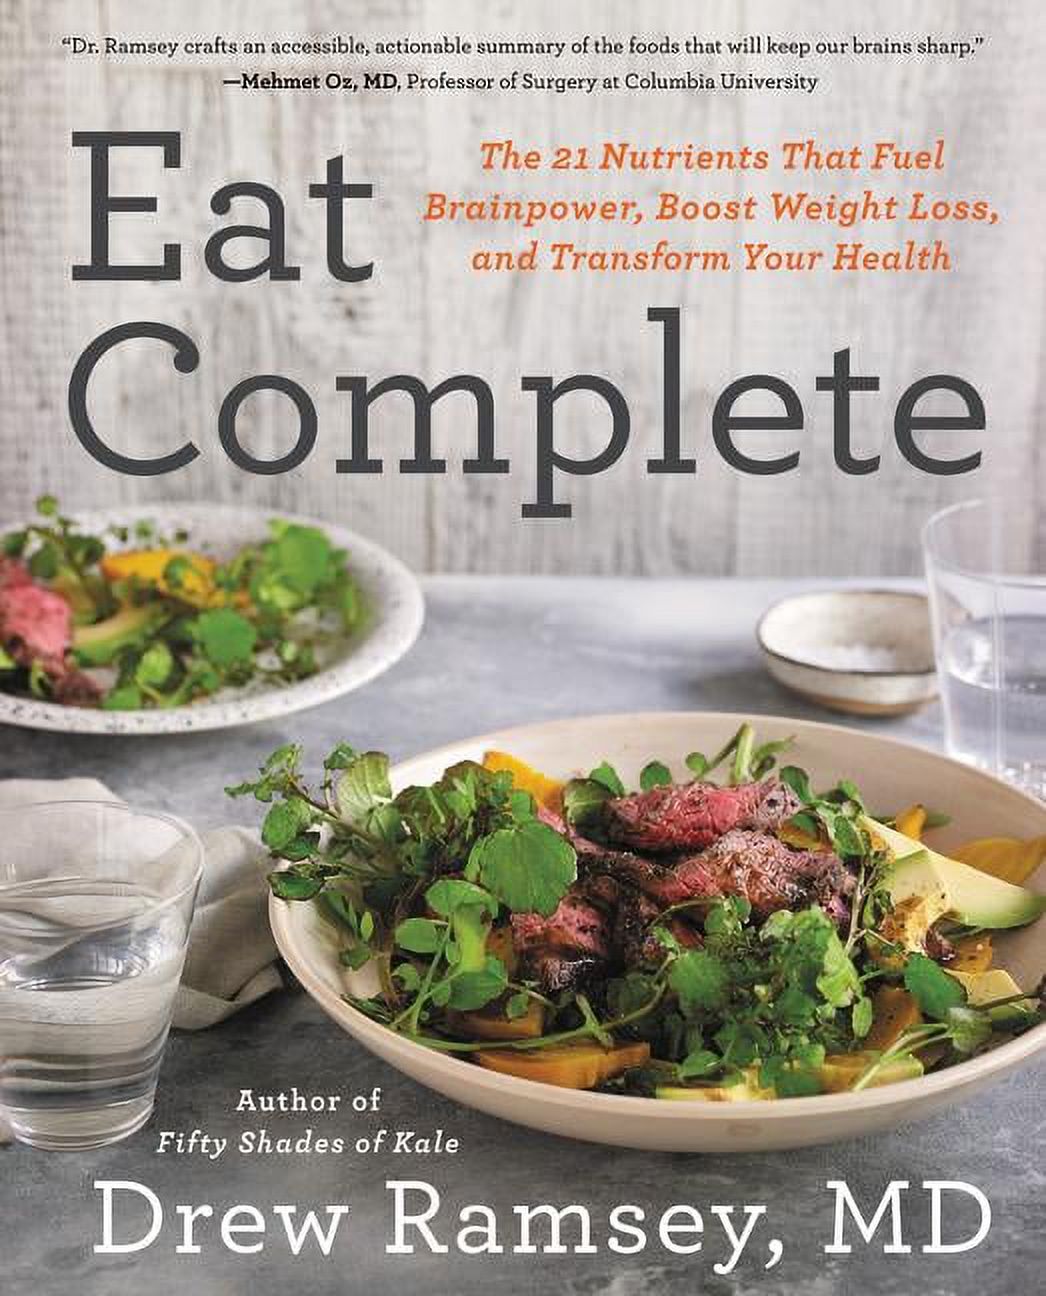 Eat Complete: The 21 Nutrients That Fuel Brainpower, Boost Weight Loss, and Transform Your Health (Hardcover) - image 1 of 1